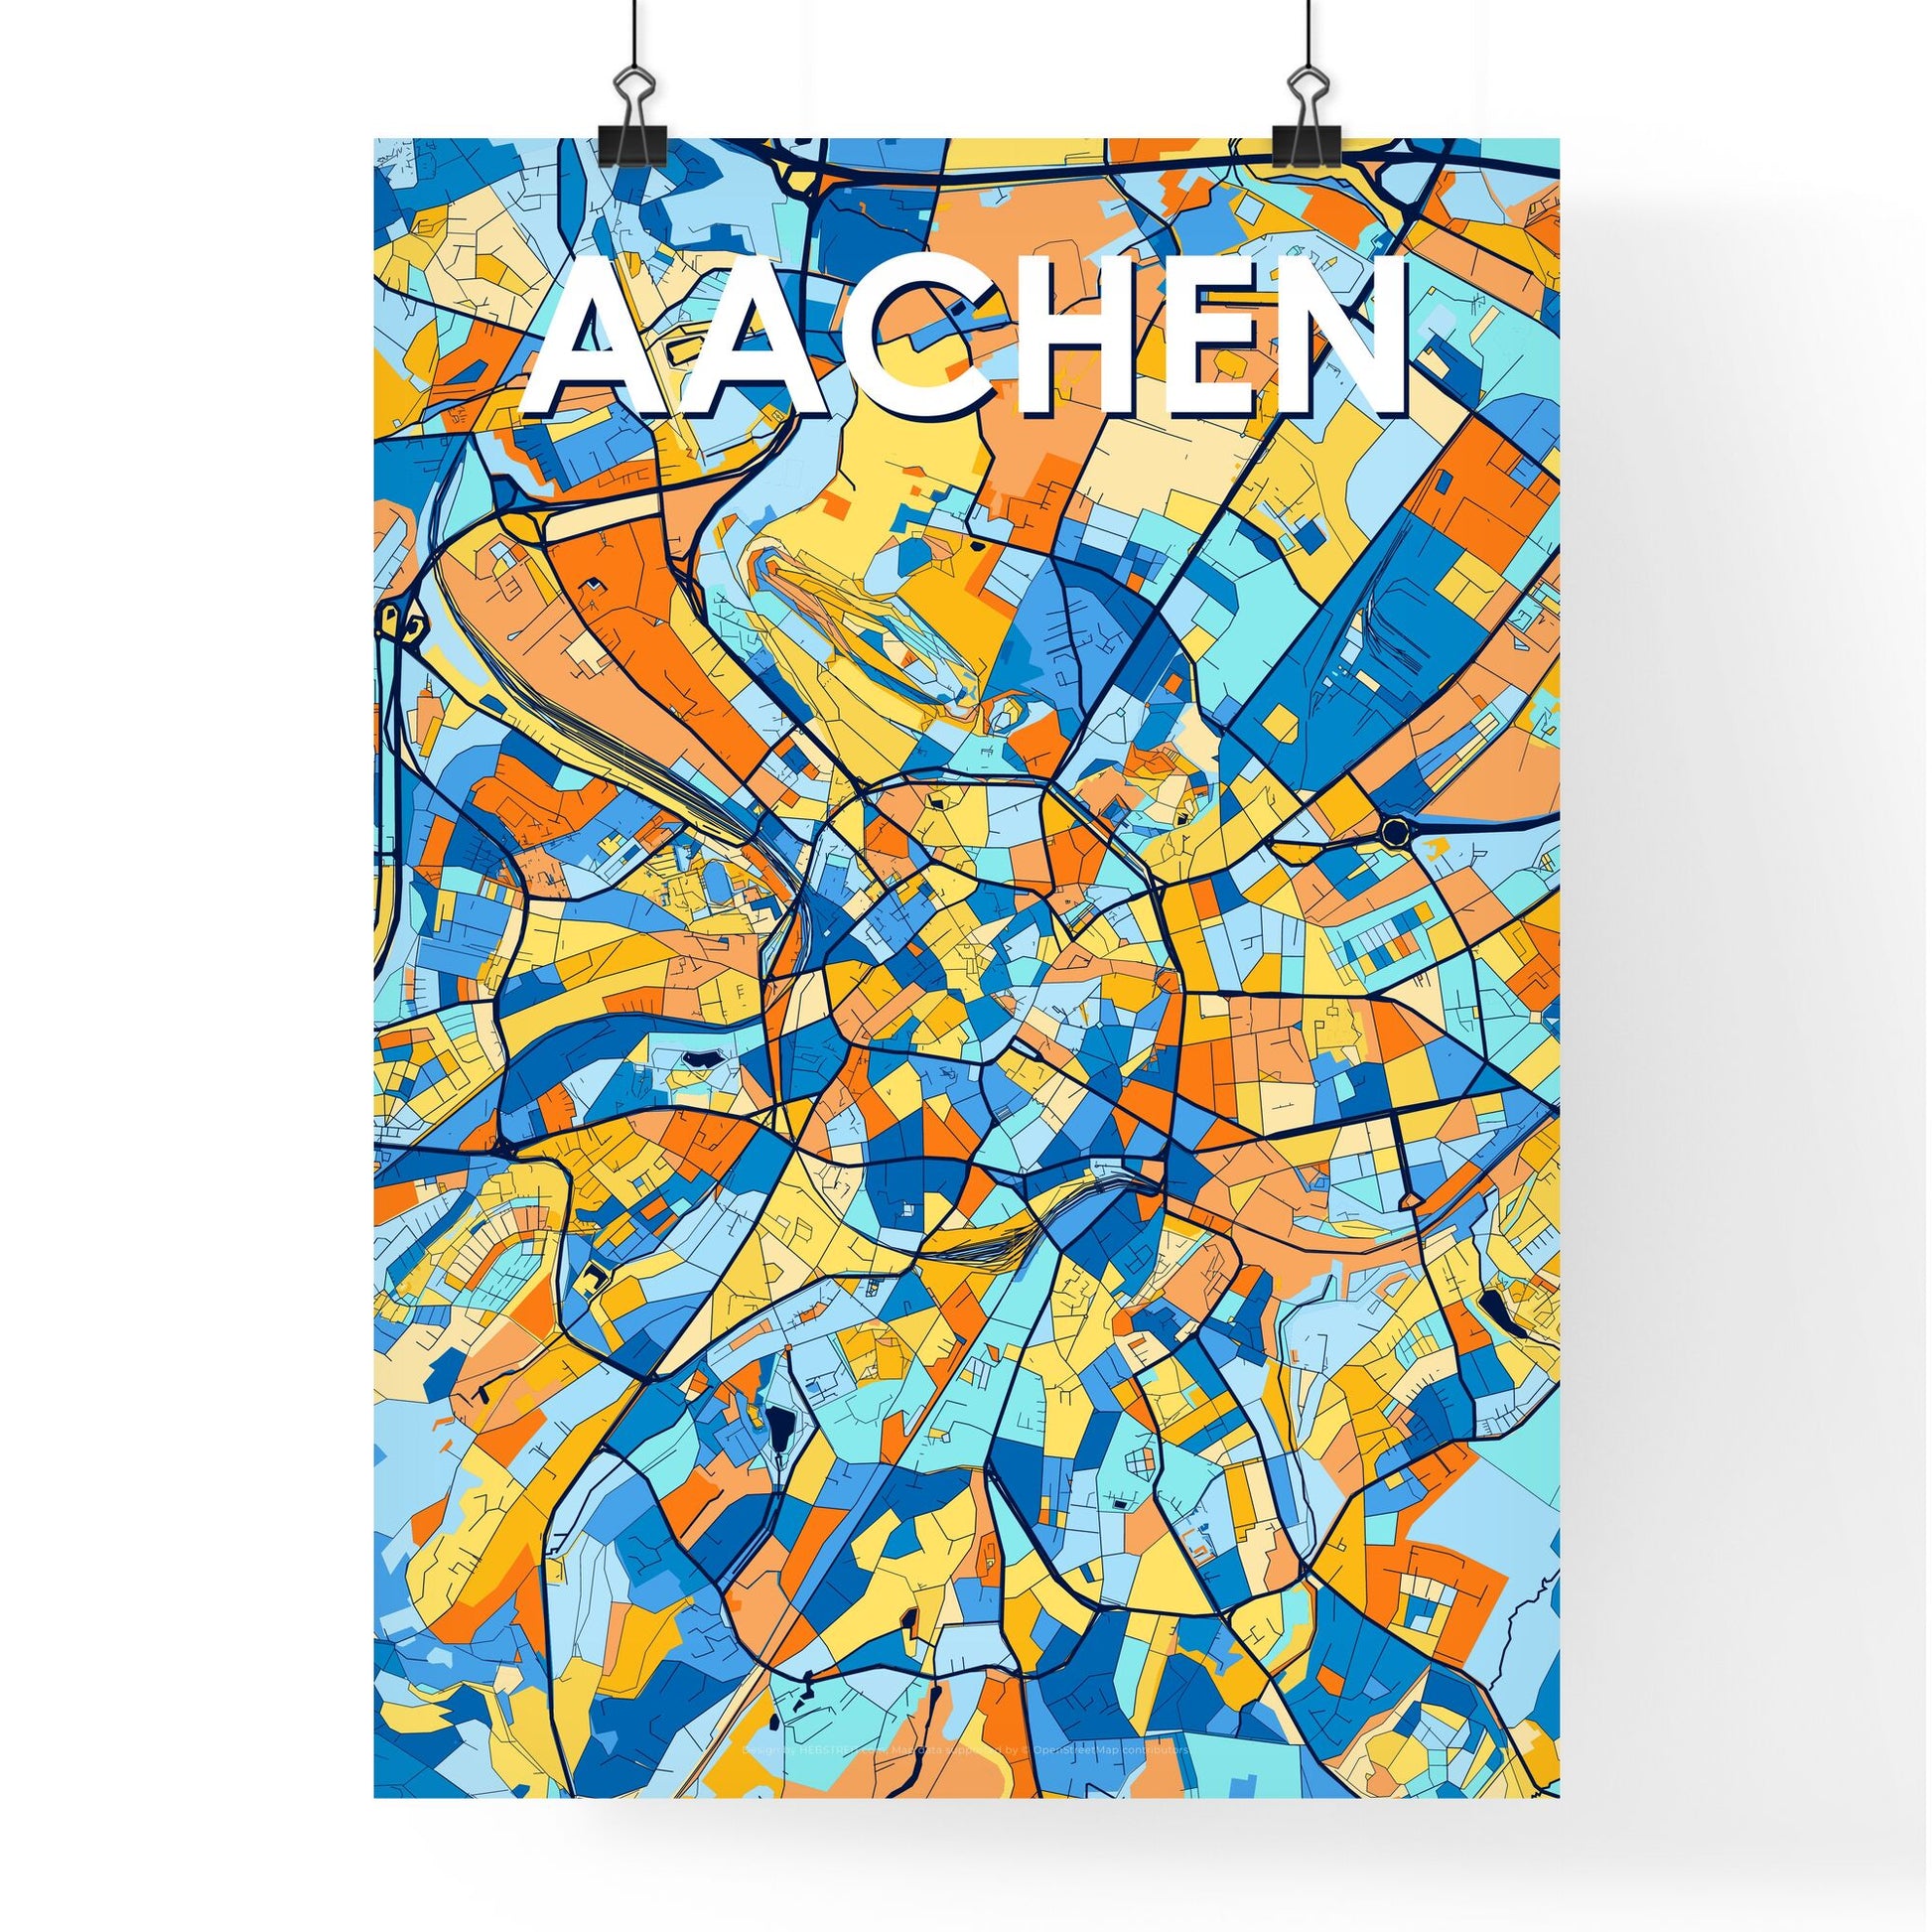 AACHEN GERMANY Vibrant Colorful Art Map Poster Blue Orange